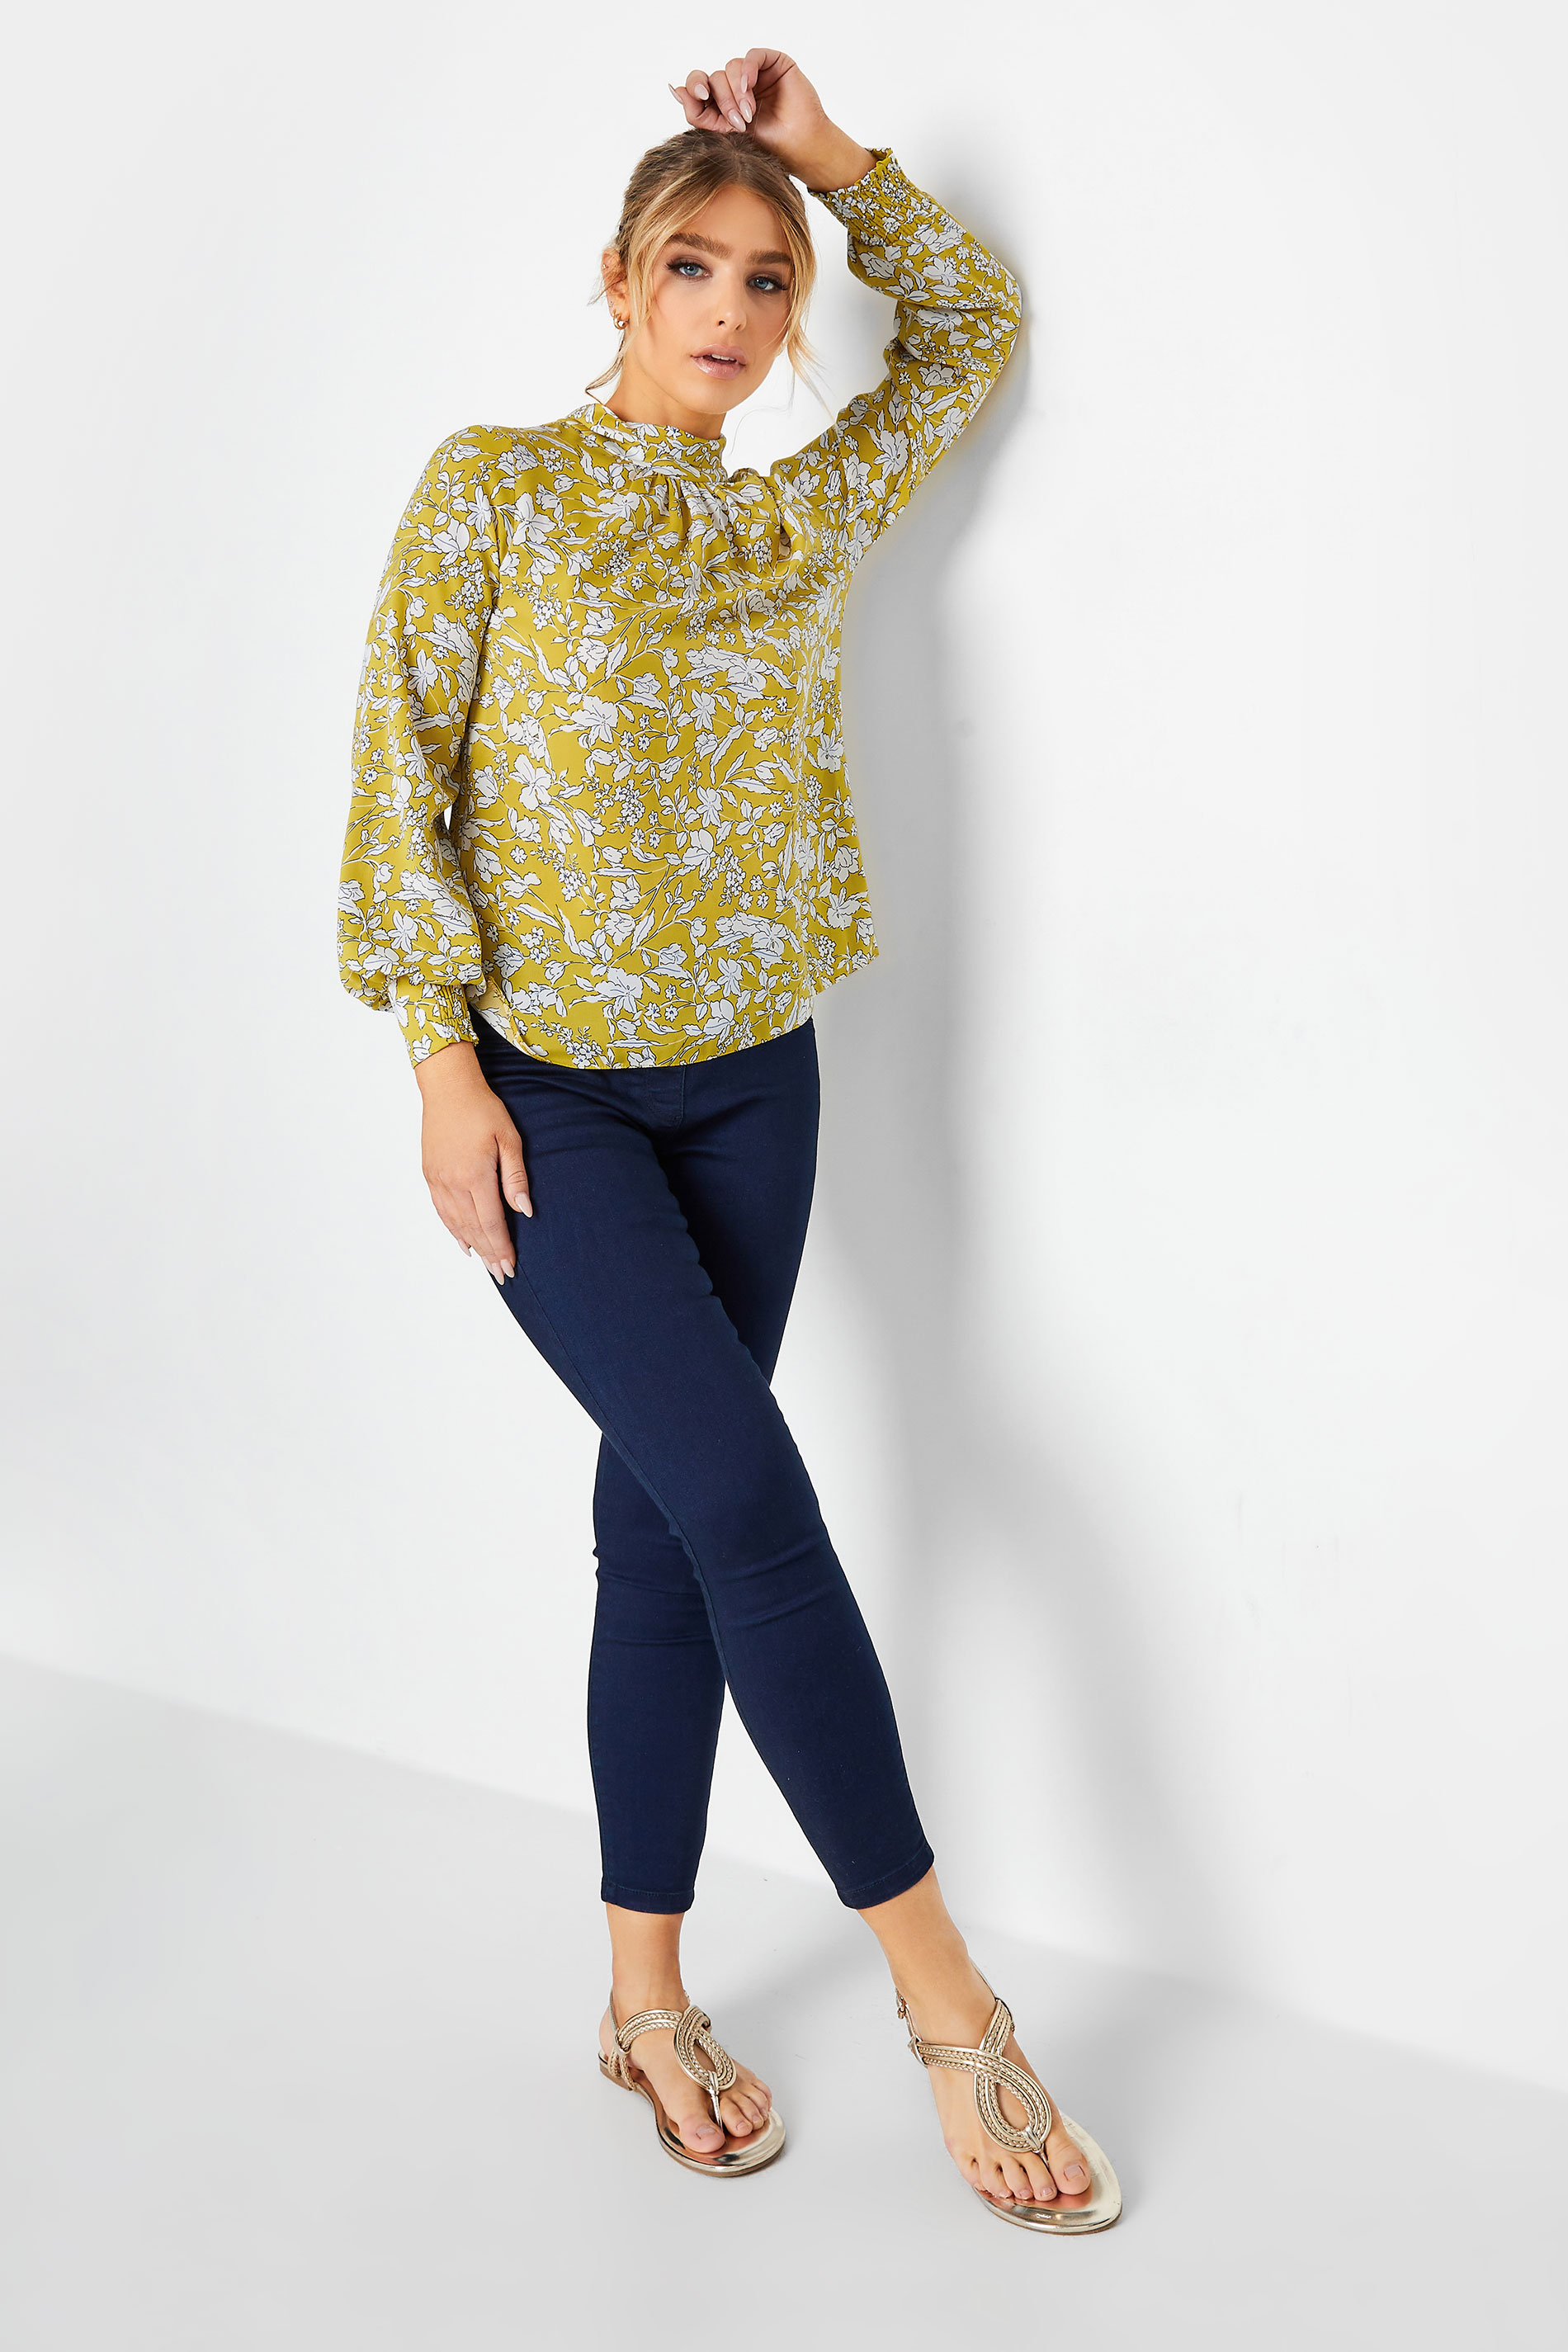 Yellow Floral Printed Top With Bell Sleeves 